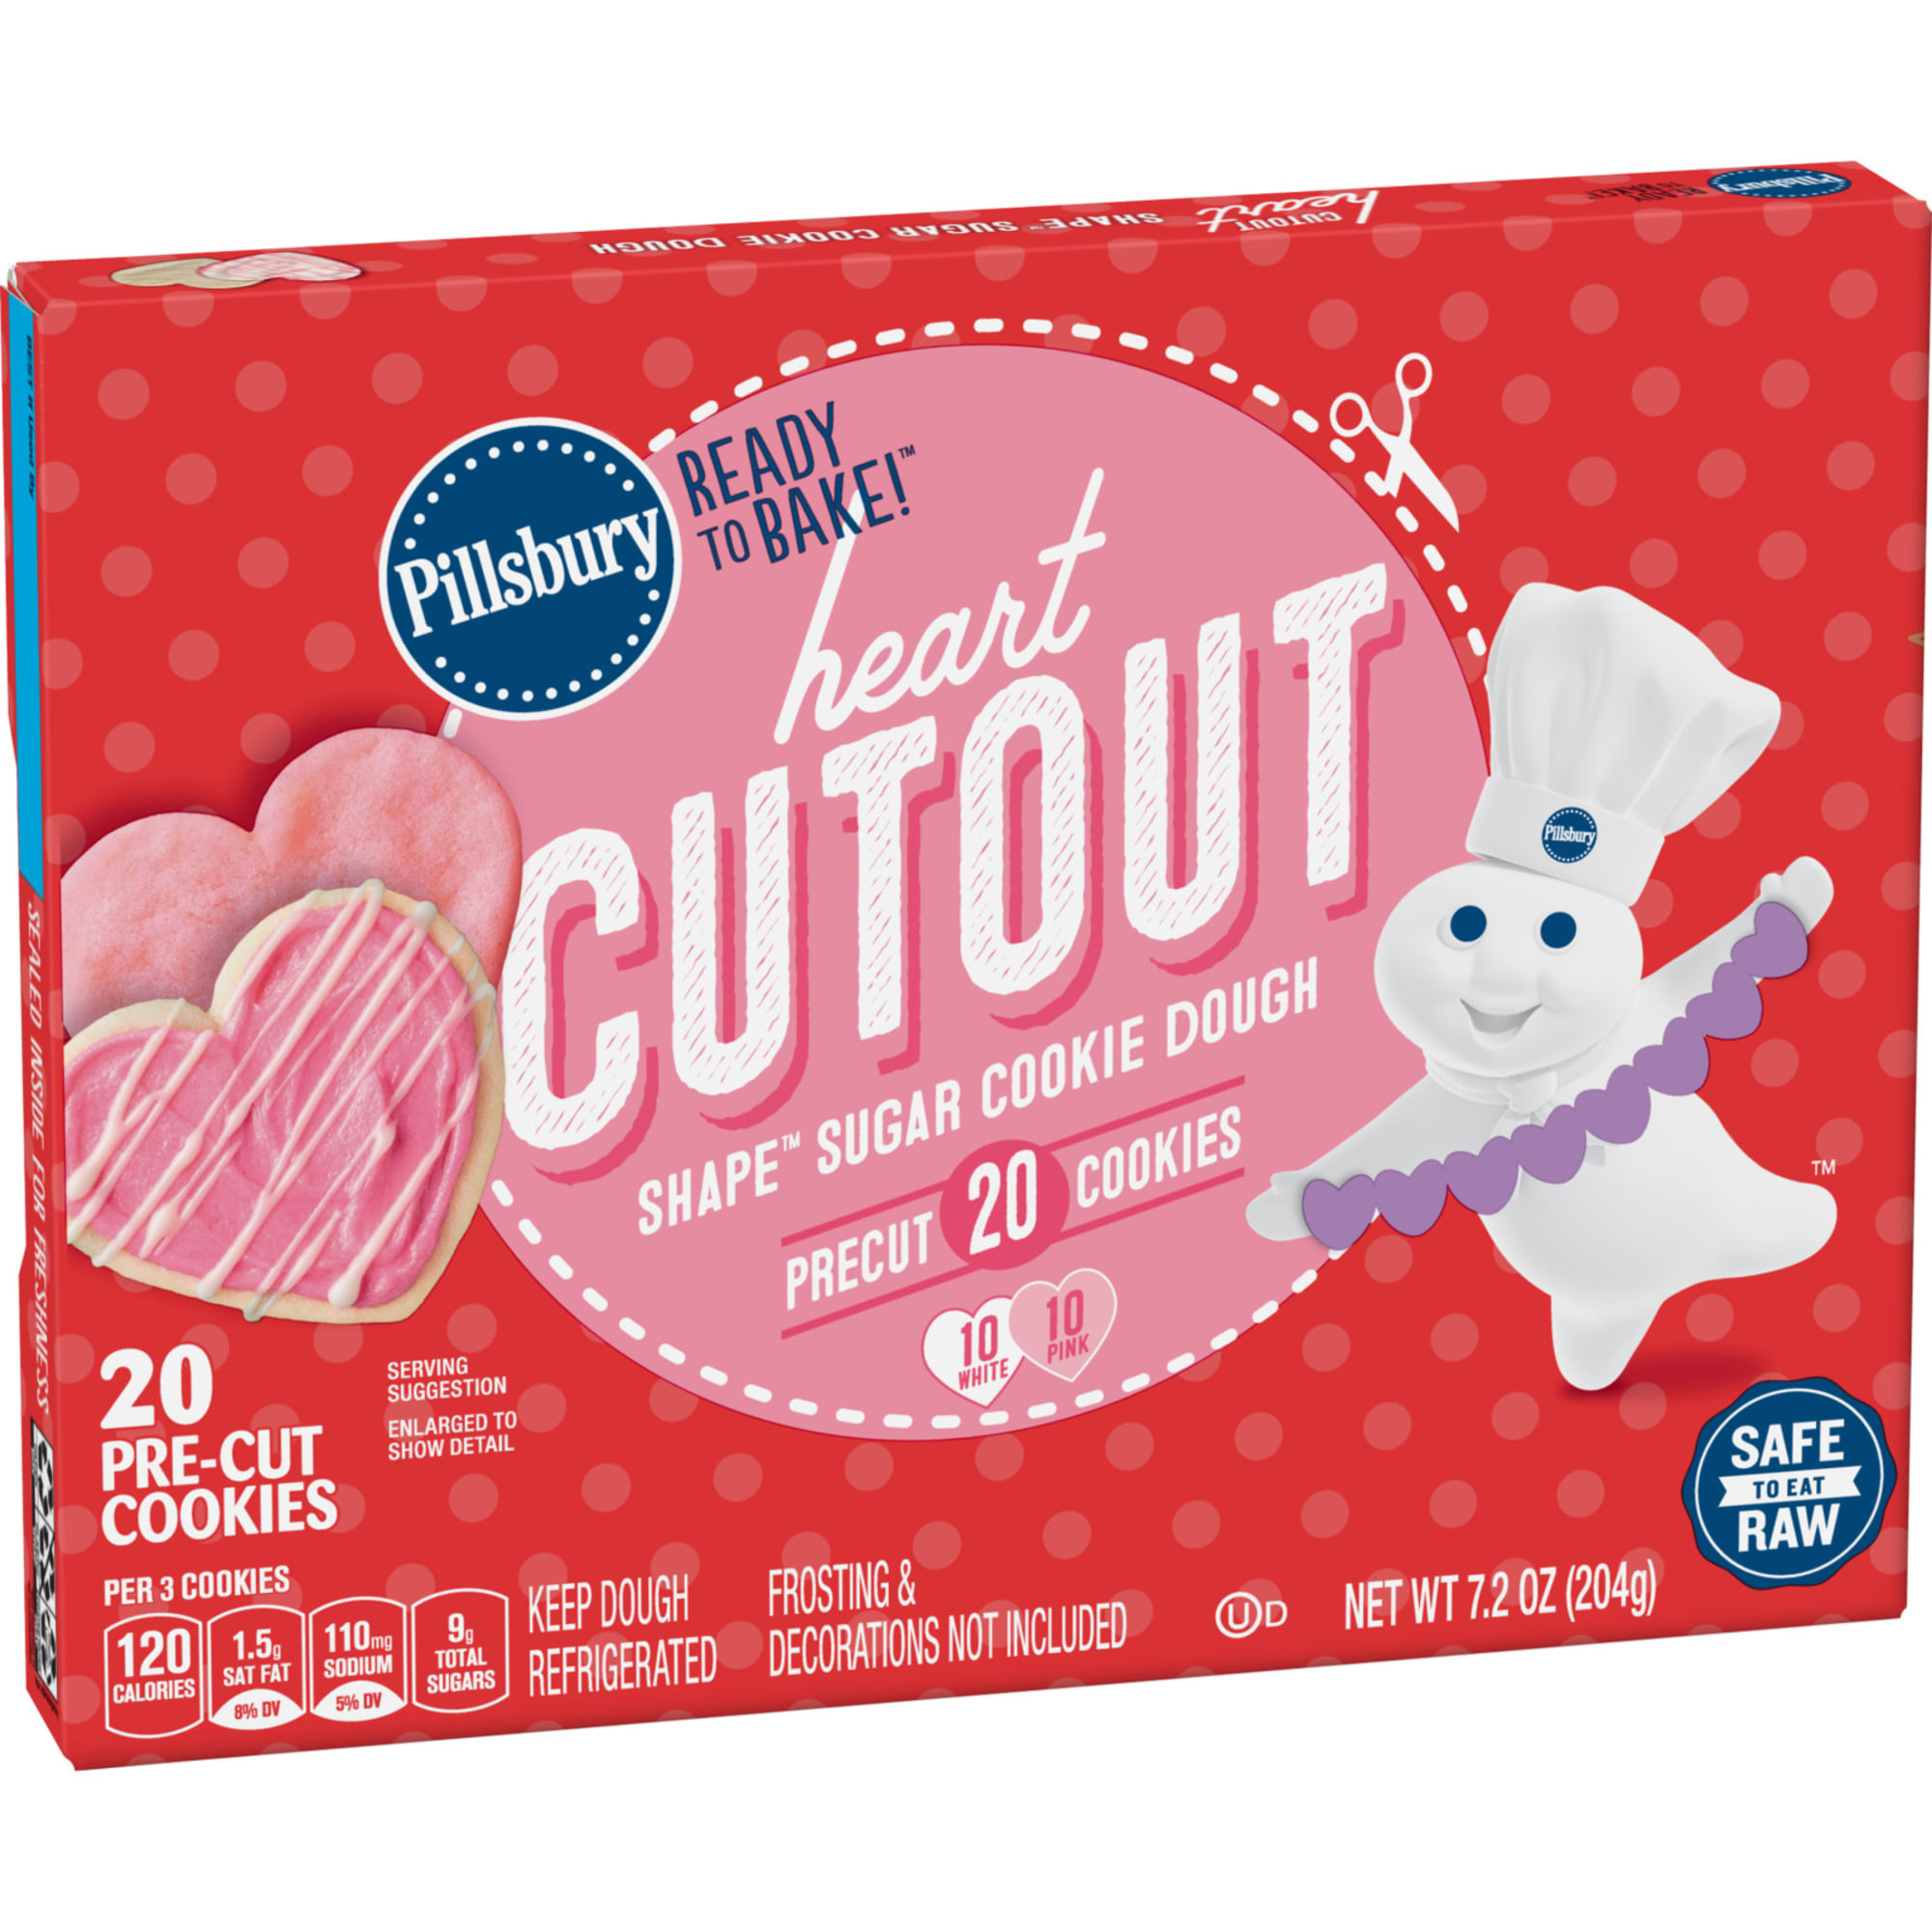 Pillsbury Celebrating Valentine S Day With Two Ready To Bake Sugar Cookies